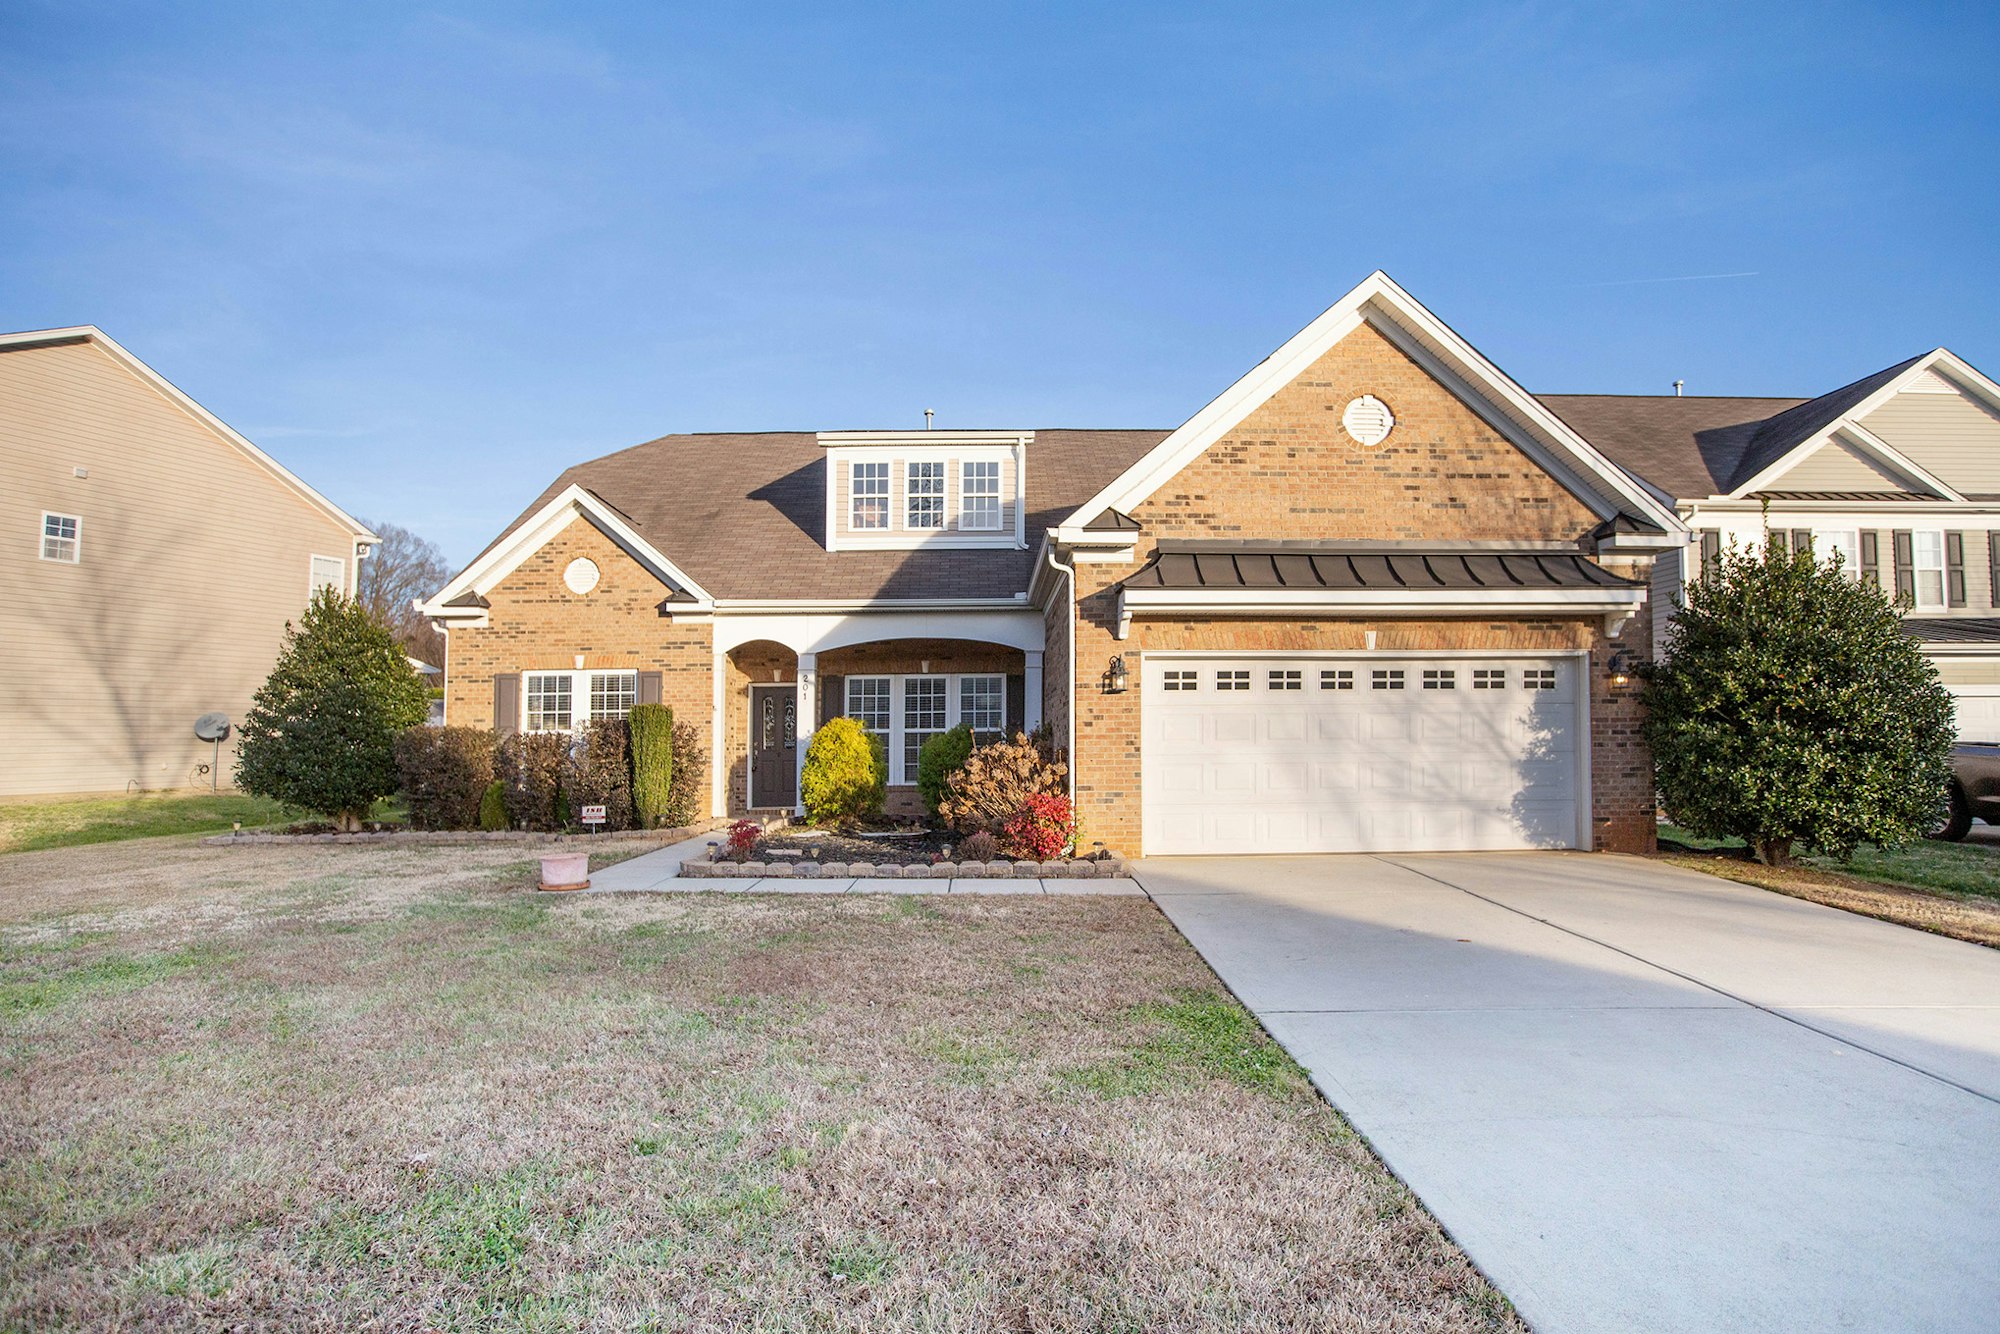 Photo 1 of 17 - 201 Tall Wheat Ln, Mount Holly, NC 28120